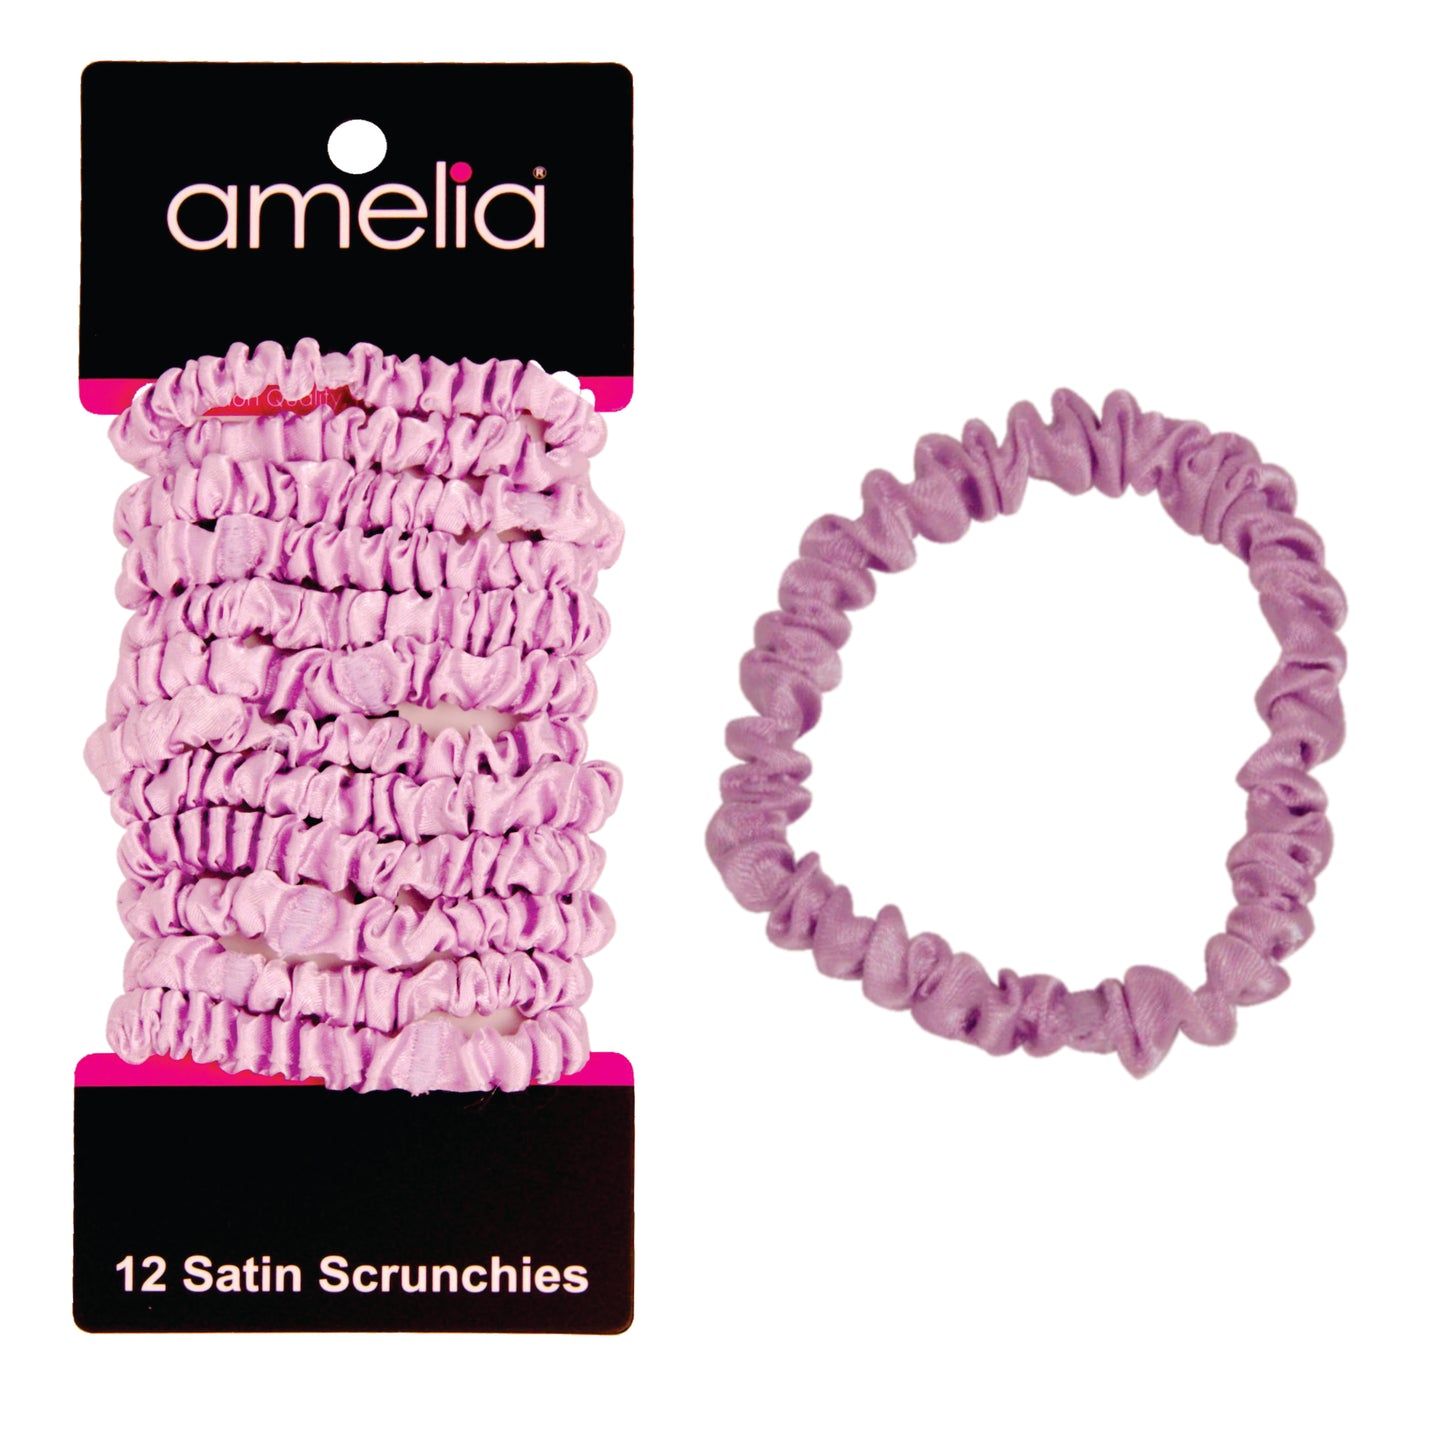 Amelia Beauty, Pink Skinny Satin Scrunchies, 2in Diameter, Gentle and Strong Hold, No Snag, No Dents or Creases. 12 Pack